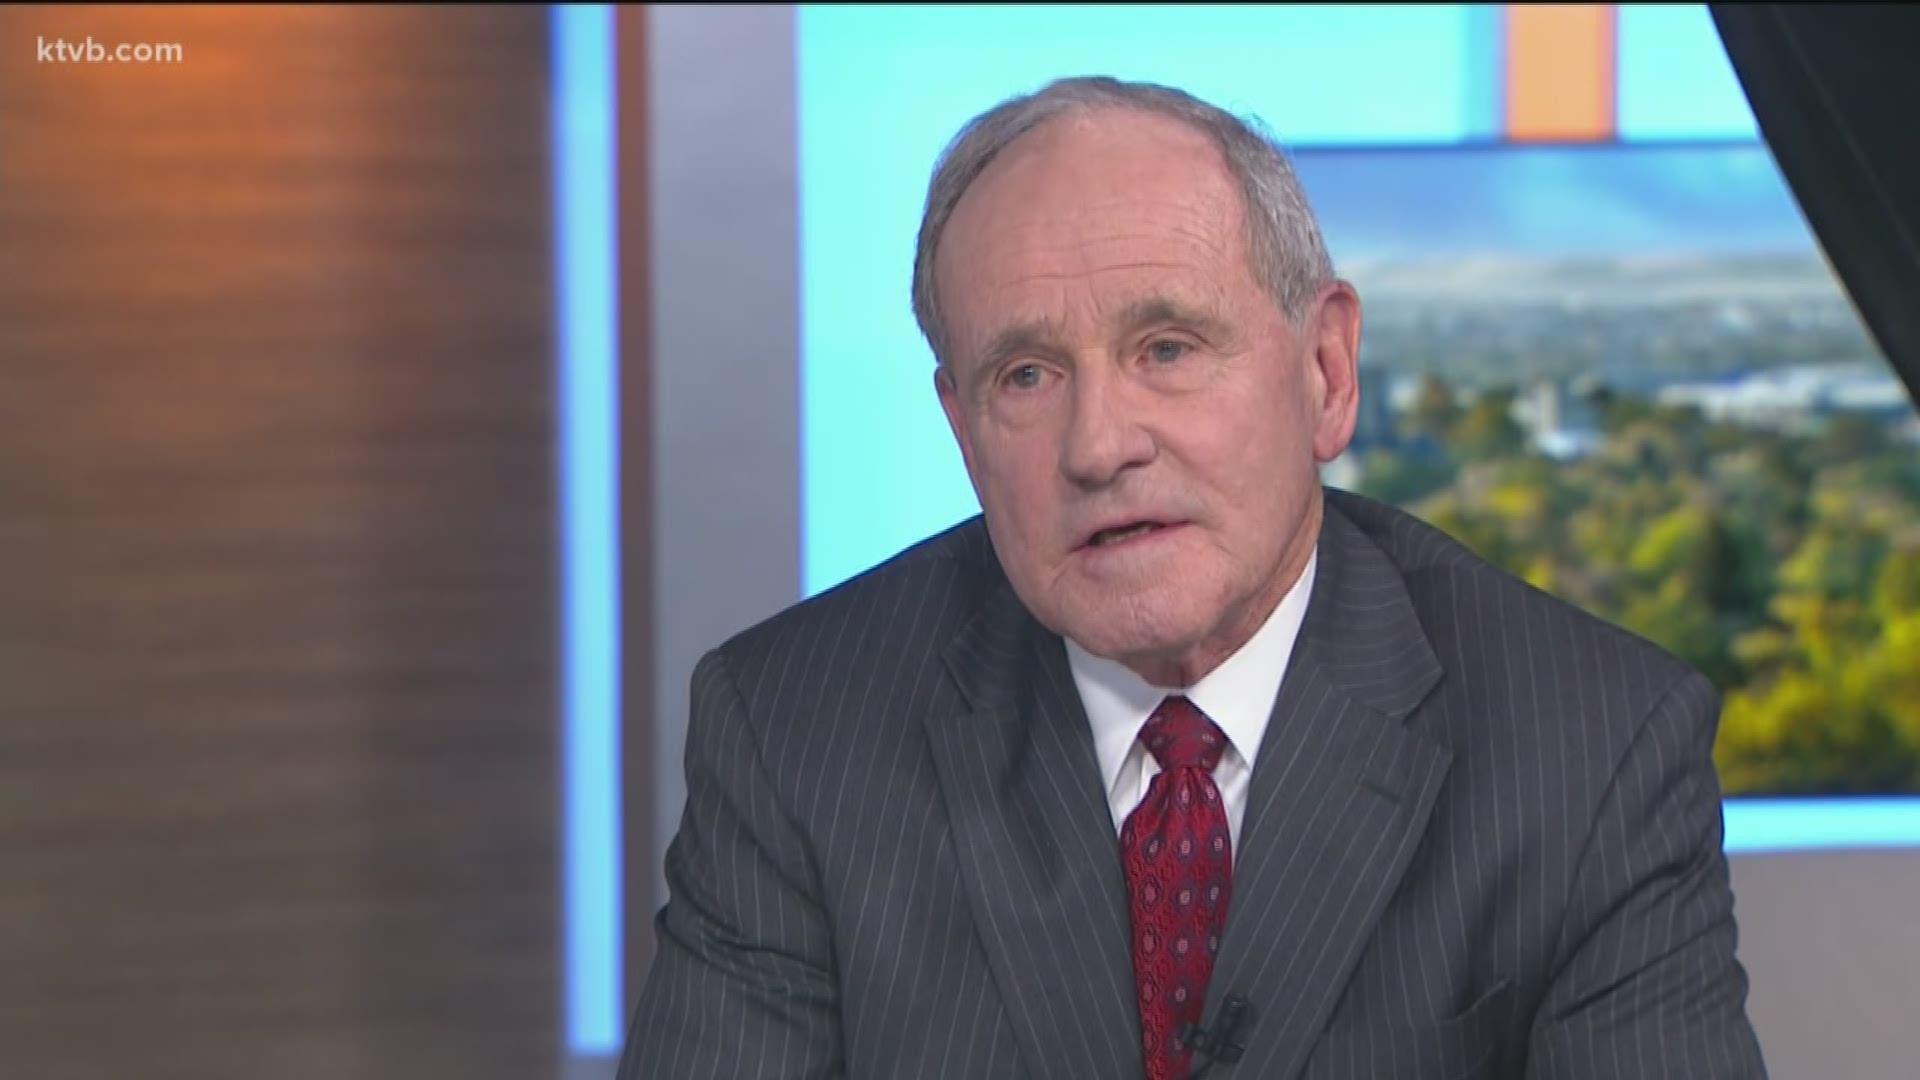 Back in Idaho for the Christmas break, Sen. Jim Risch stopped by the KTVB studio to weigh in on the Senate's impending impeachment trial of President Donald Trump.